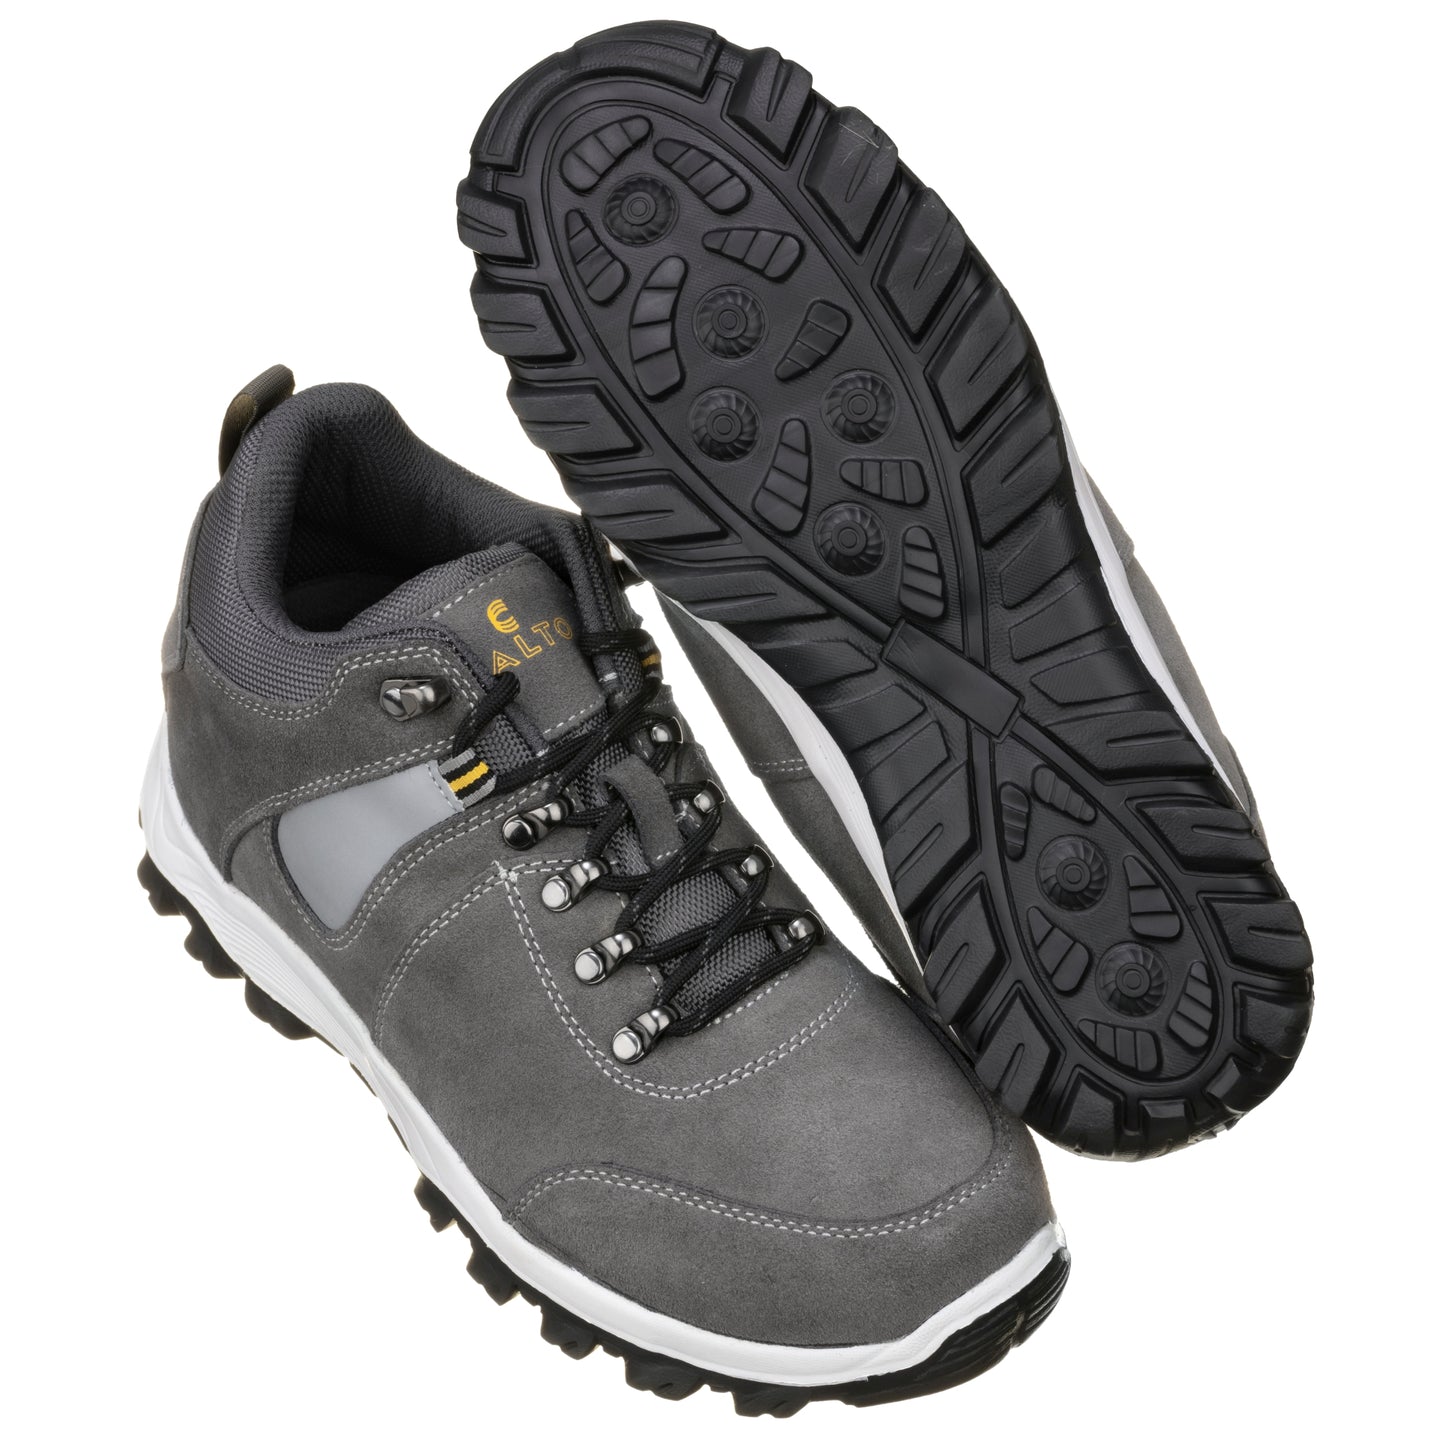 Elevator shoes height increase CALTO - S5055 - 3.2 Inches Taller (Grey) - Sneakers